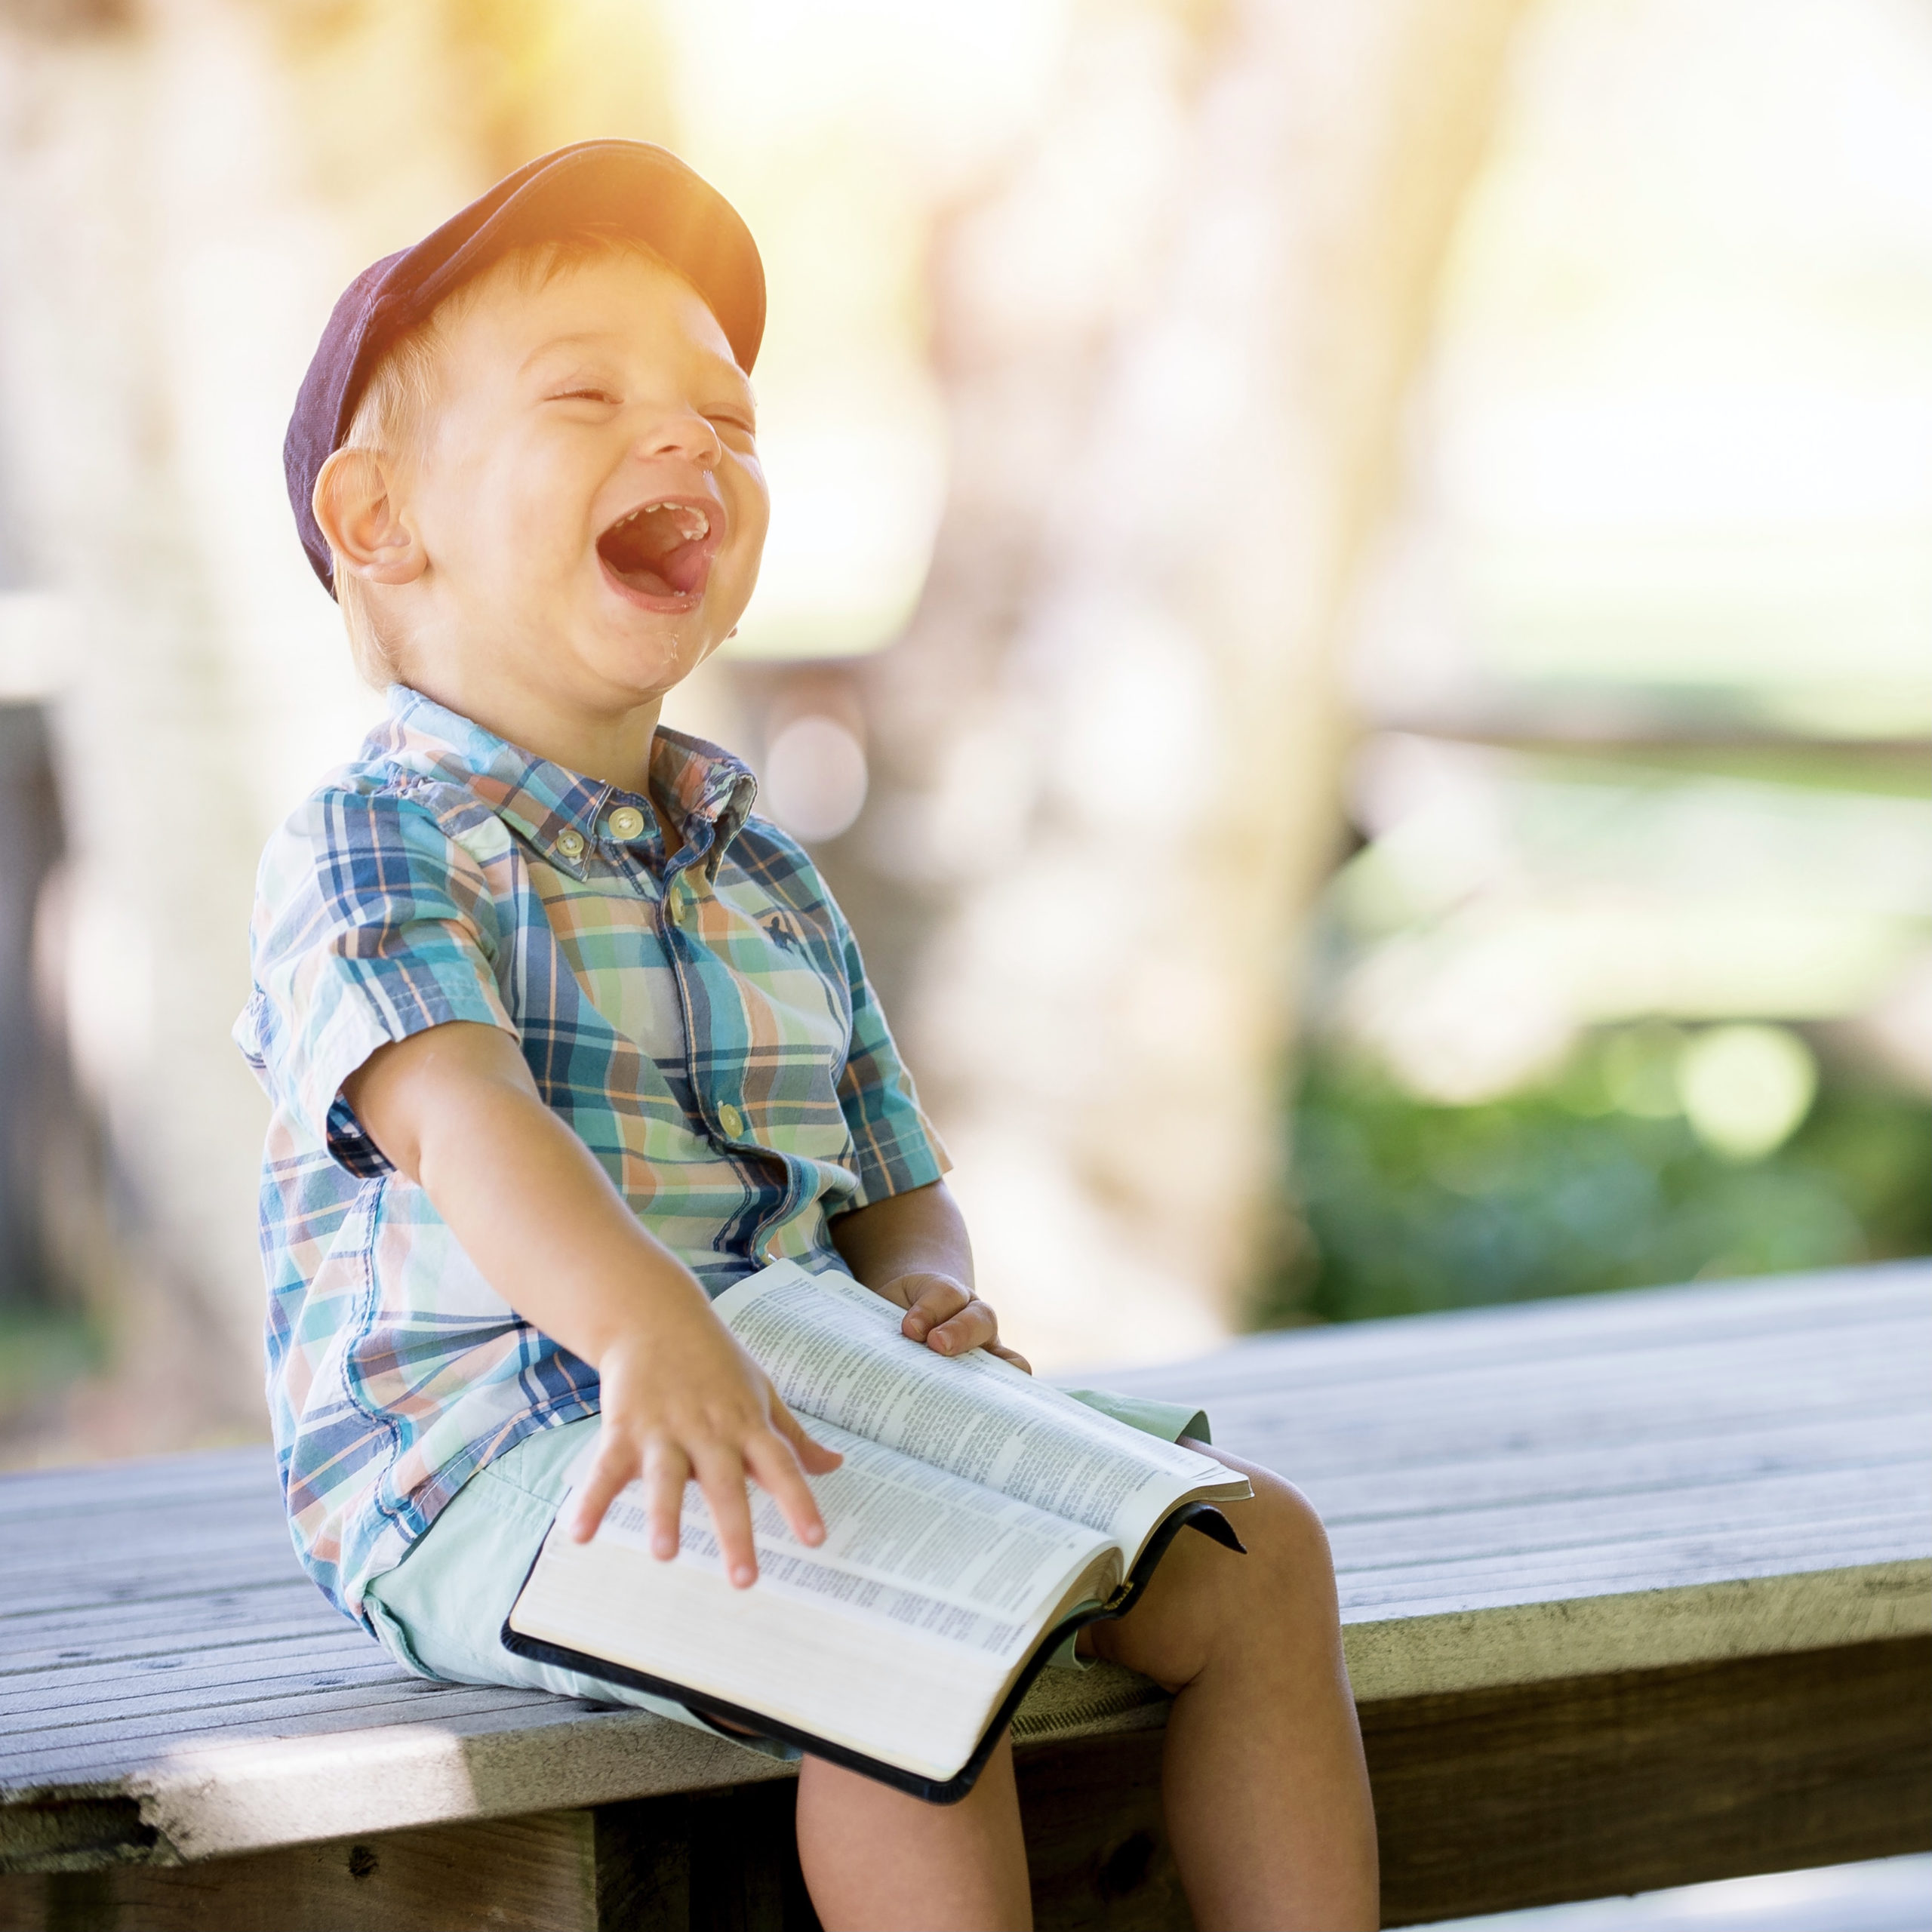 difference between happiness and joy | toddler sitting on a bench, holding a bible, and laughing hard